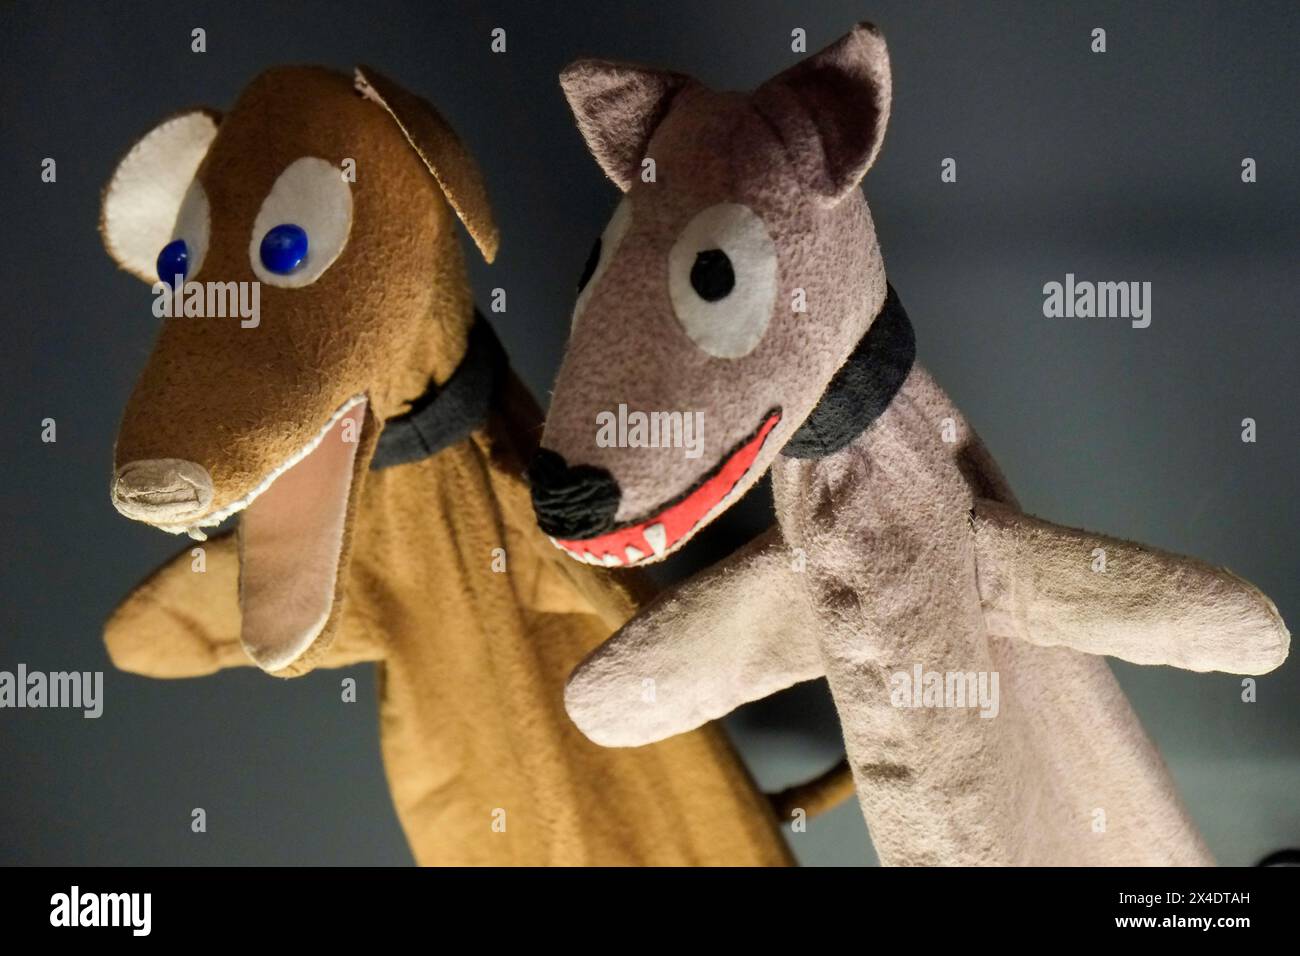 Lisbon, Portugal. Antique whimsical hand puppets. (Editorial Use Only) Stock Photo